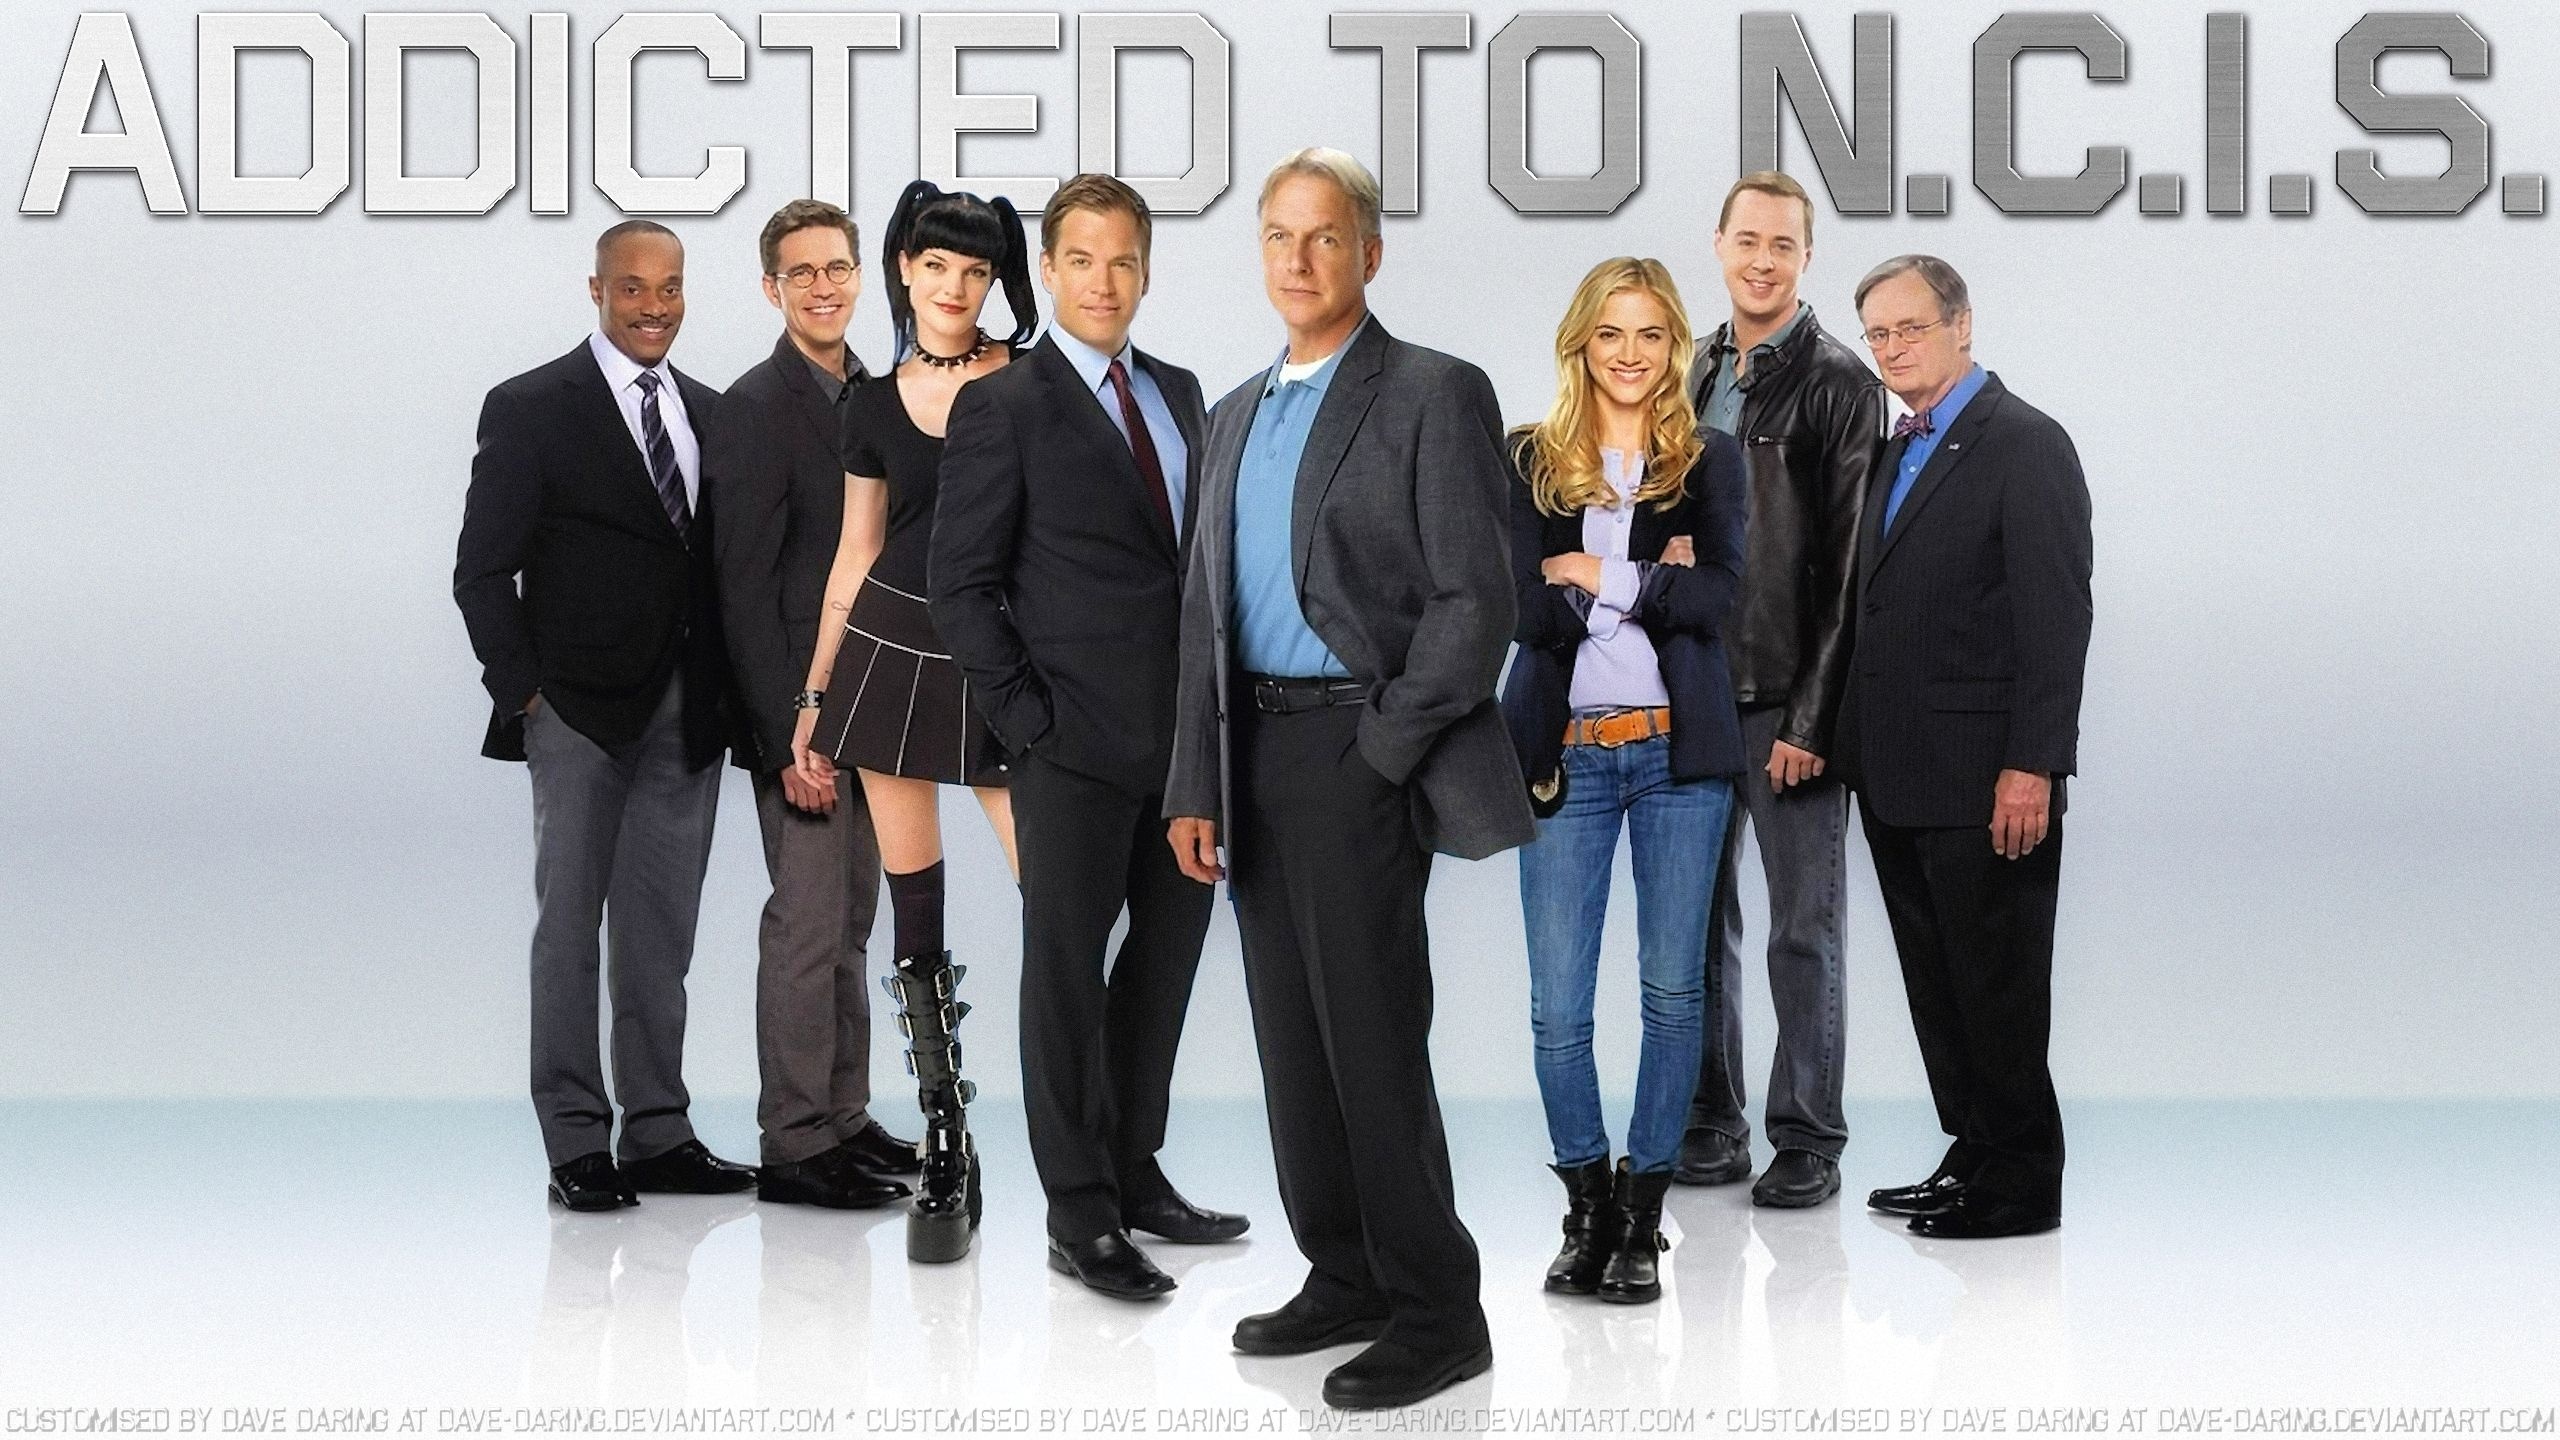 NCIS: Naval Criminal Investigative Service: A fictional team of special agents, Conducting criminal investigations involving the U.S. Navy and Marine Corps. 2560x1440 HD Wallpaper.